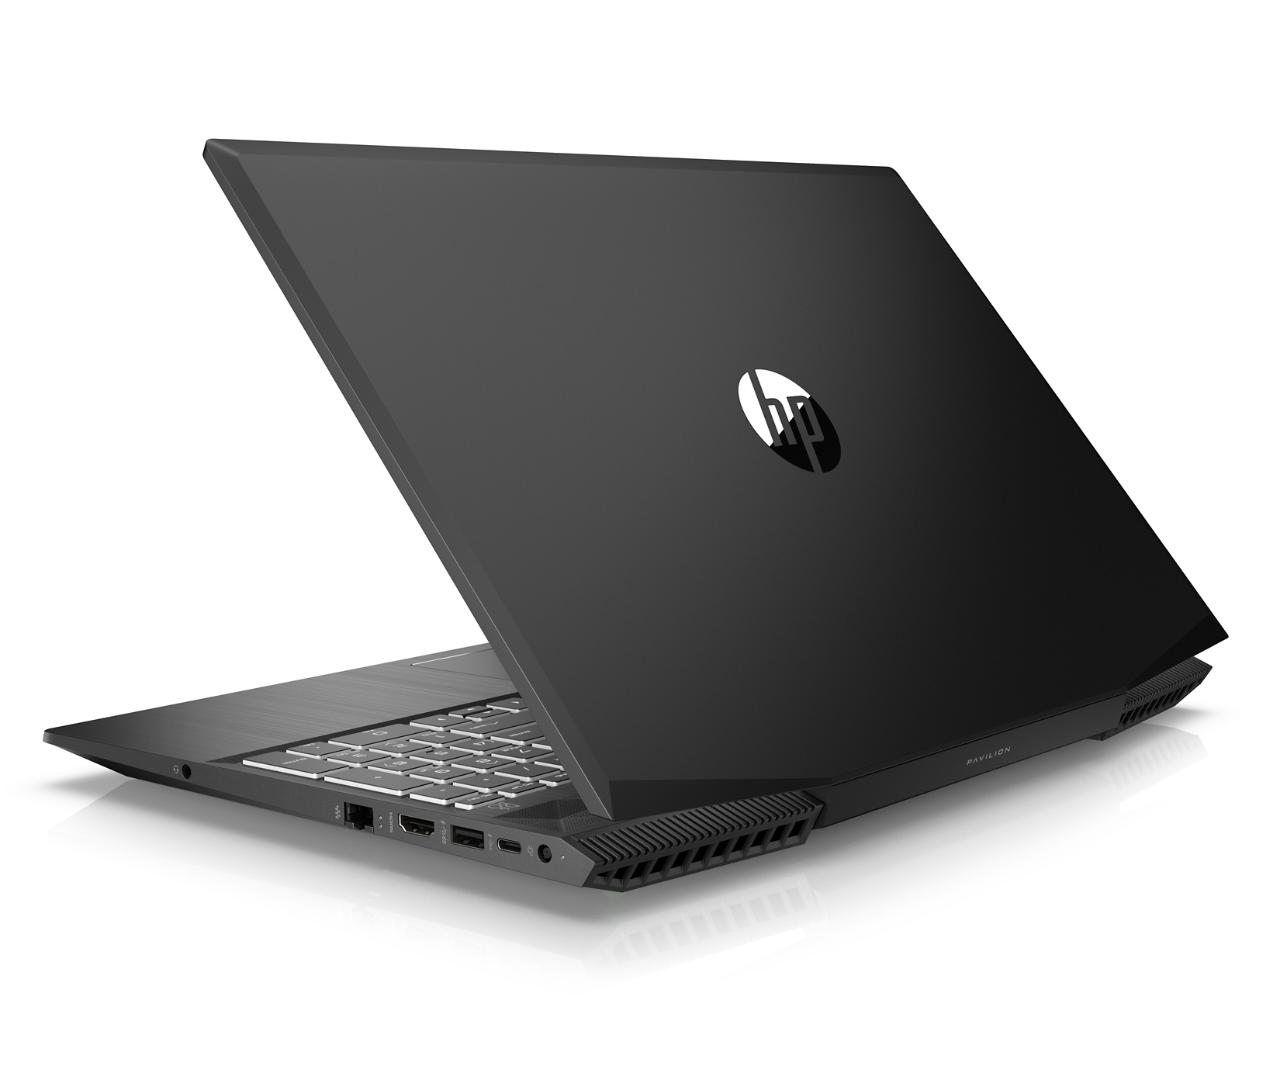 HP reveals new Pavilion Gaming lineup aimed at mainstream gamers